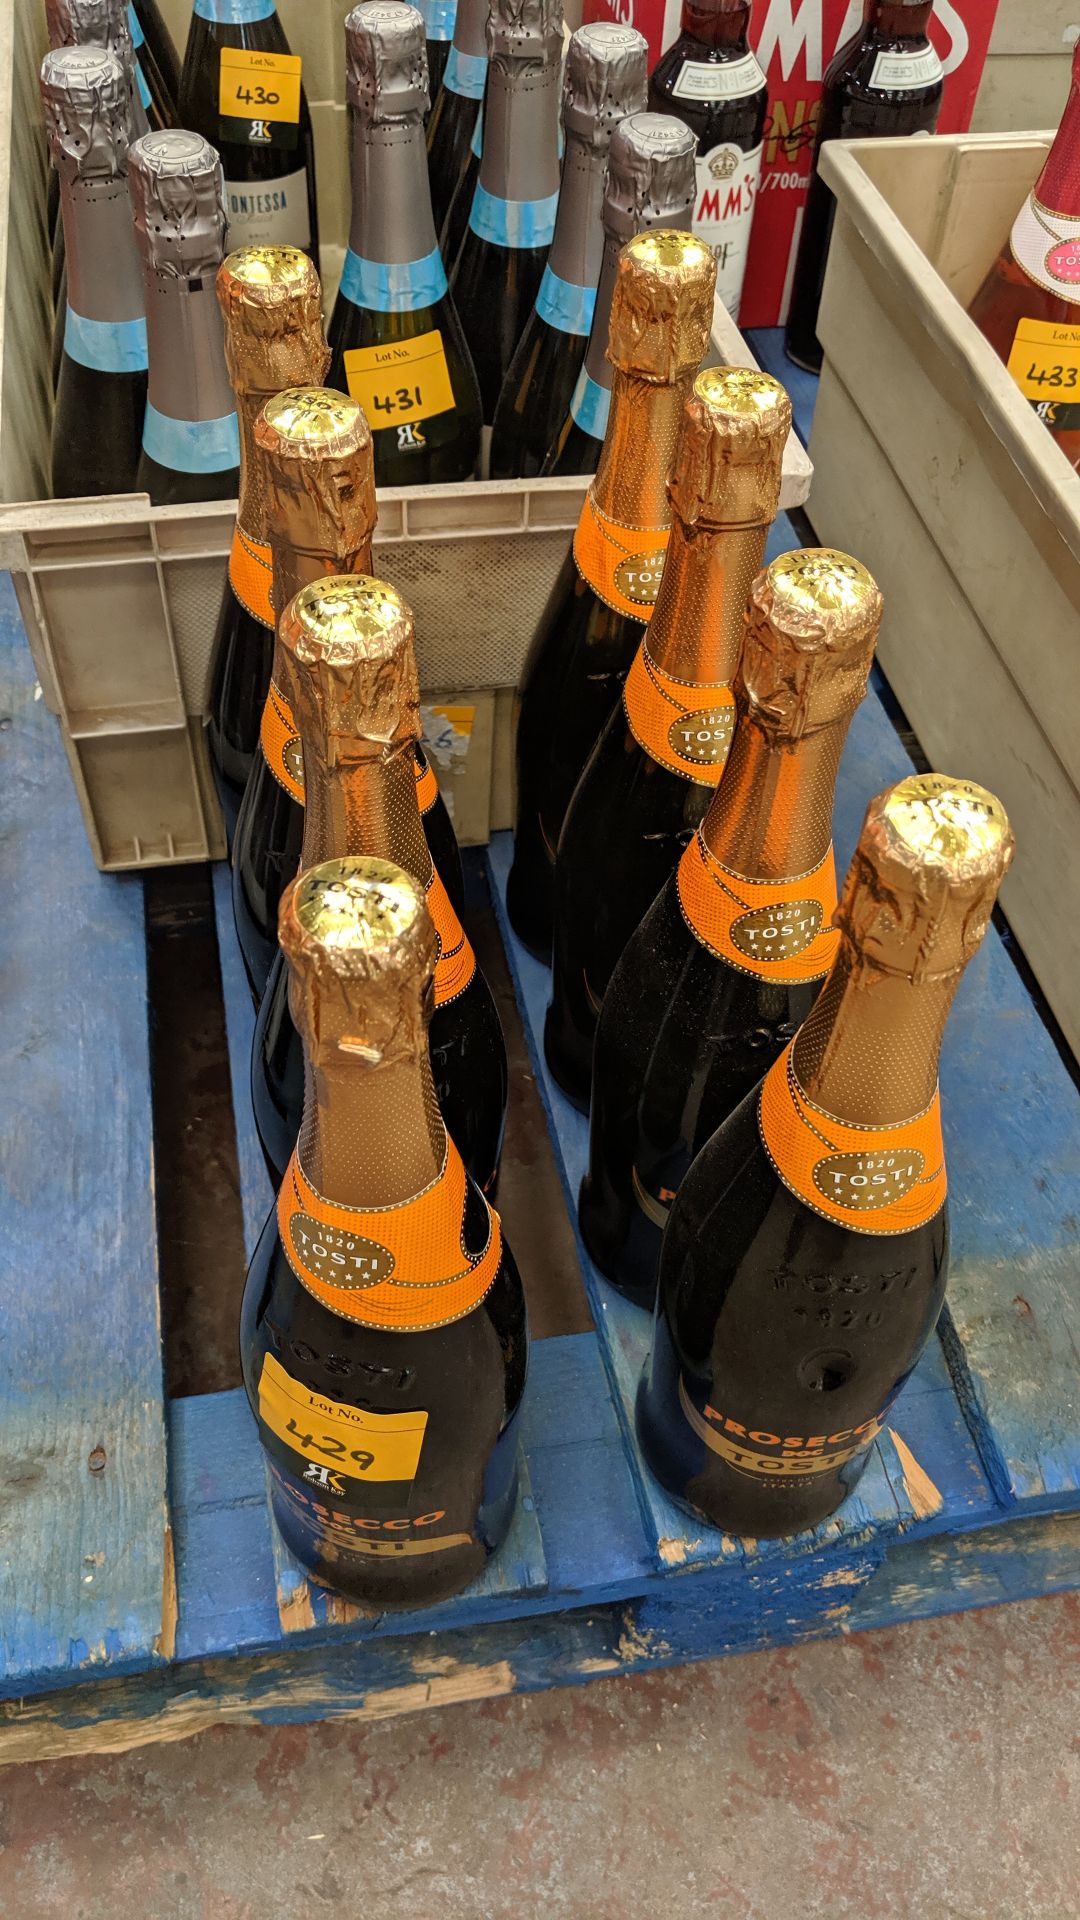 8 off 75cl bottles of Tosti extra dry DOC Italian prosecco sold under AWRS number XQAW00000101017